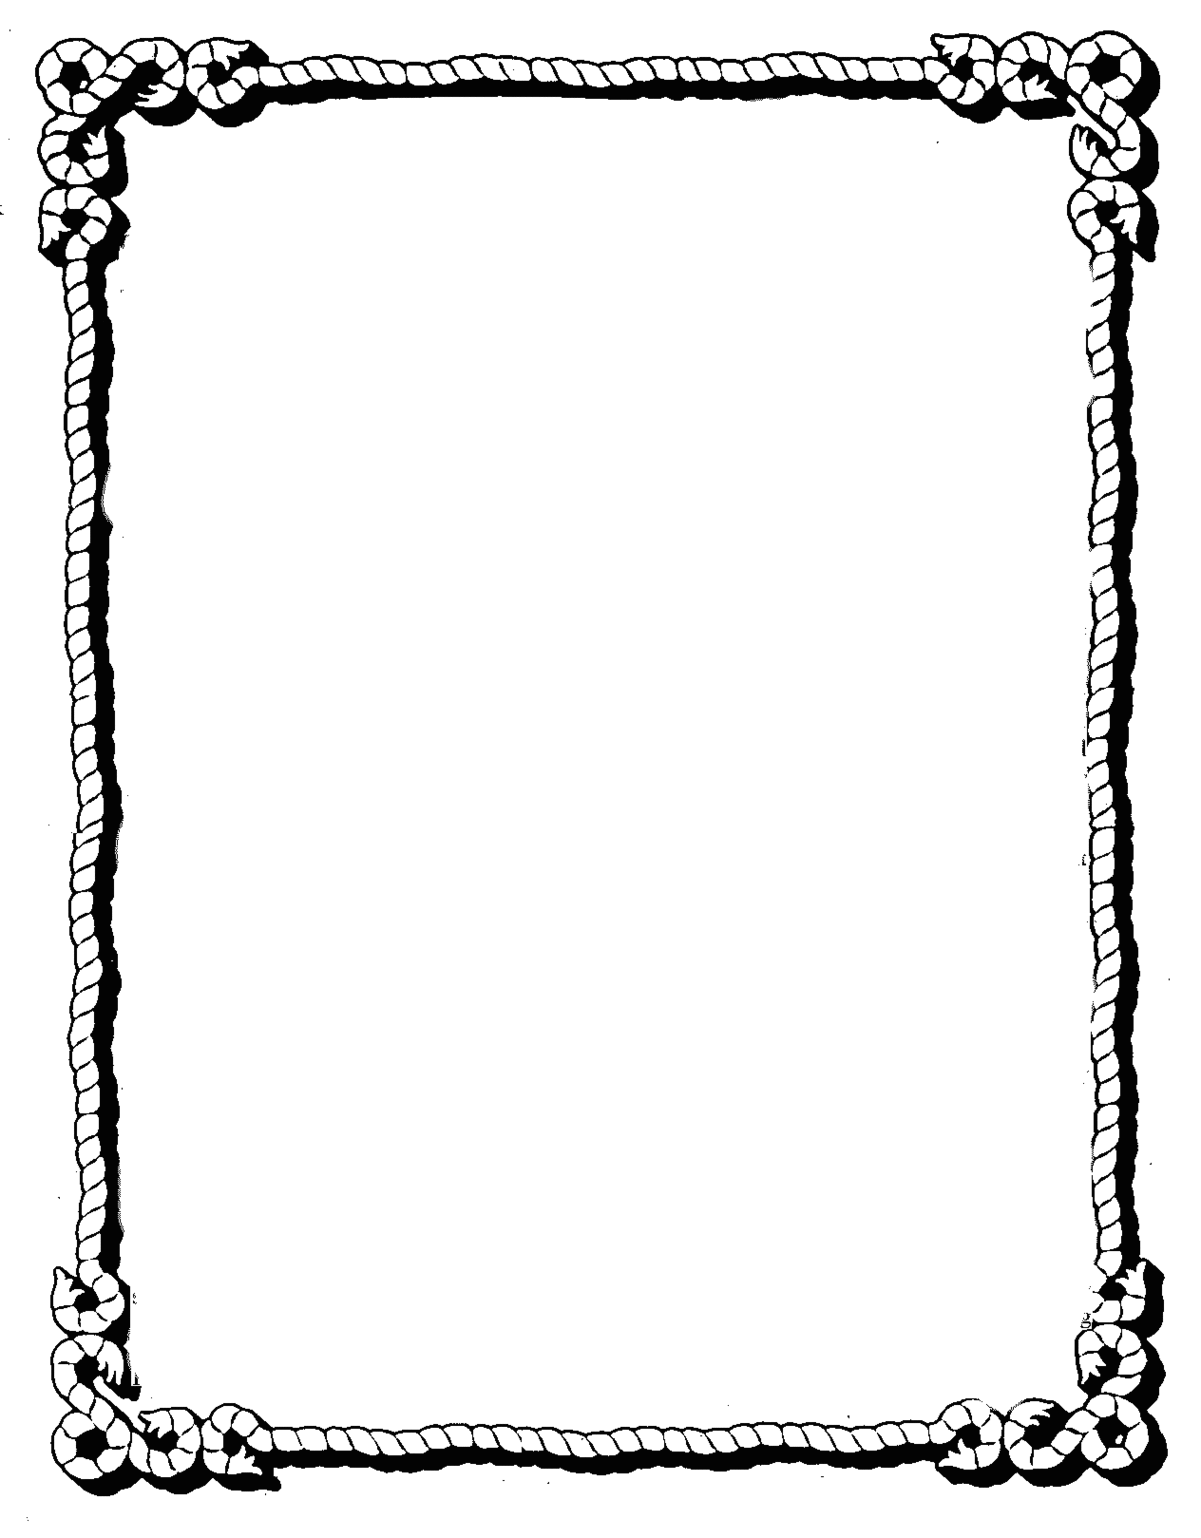 Simple Page Border Designs Clipart - Free to use Clip Art Resource